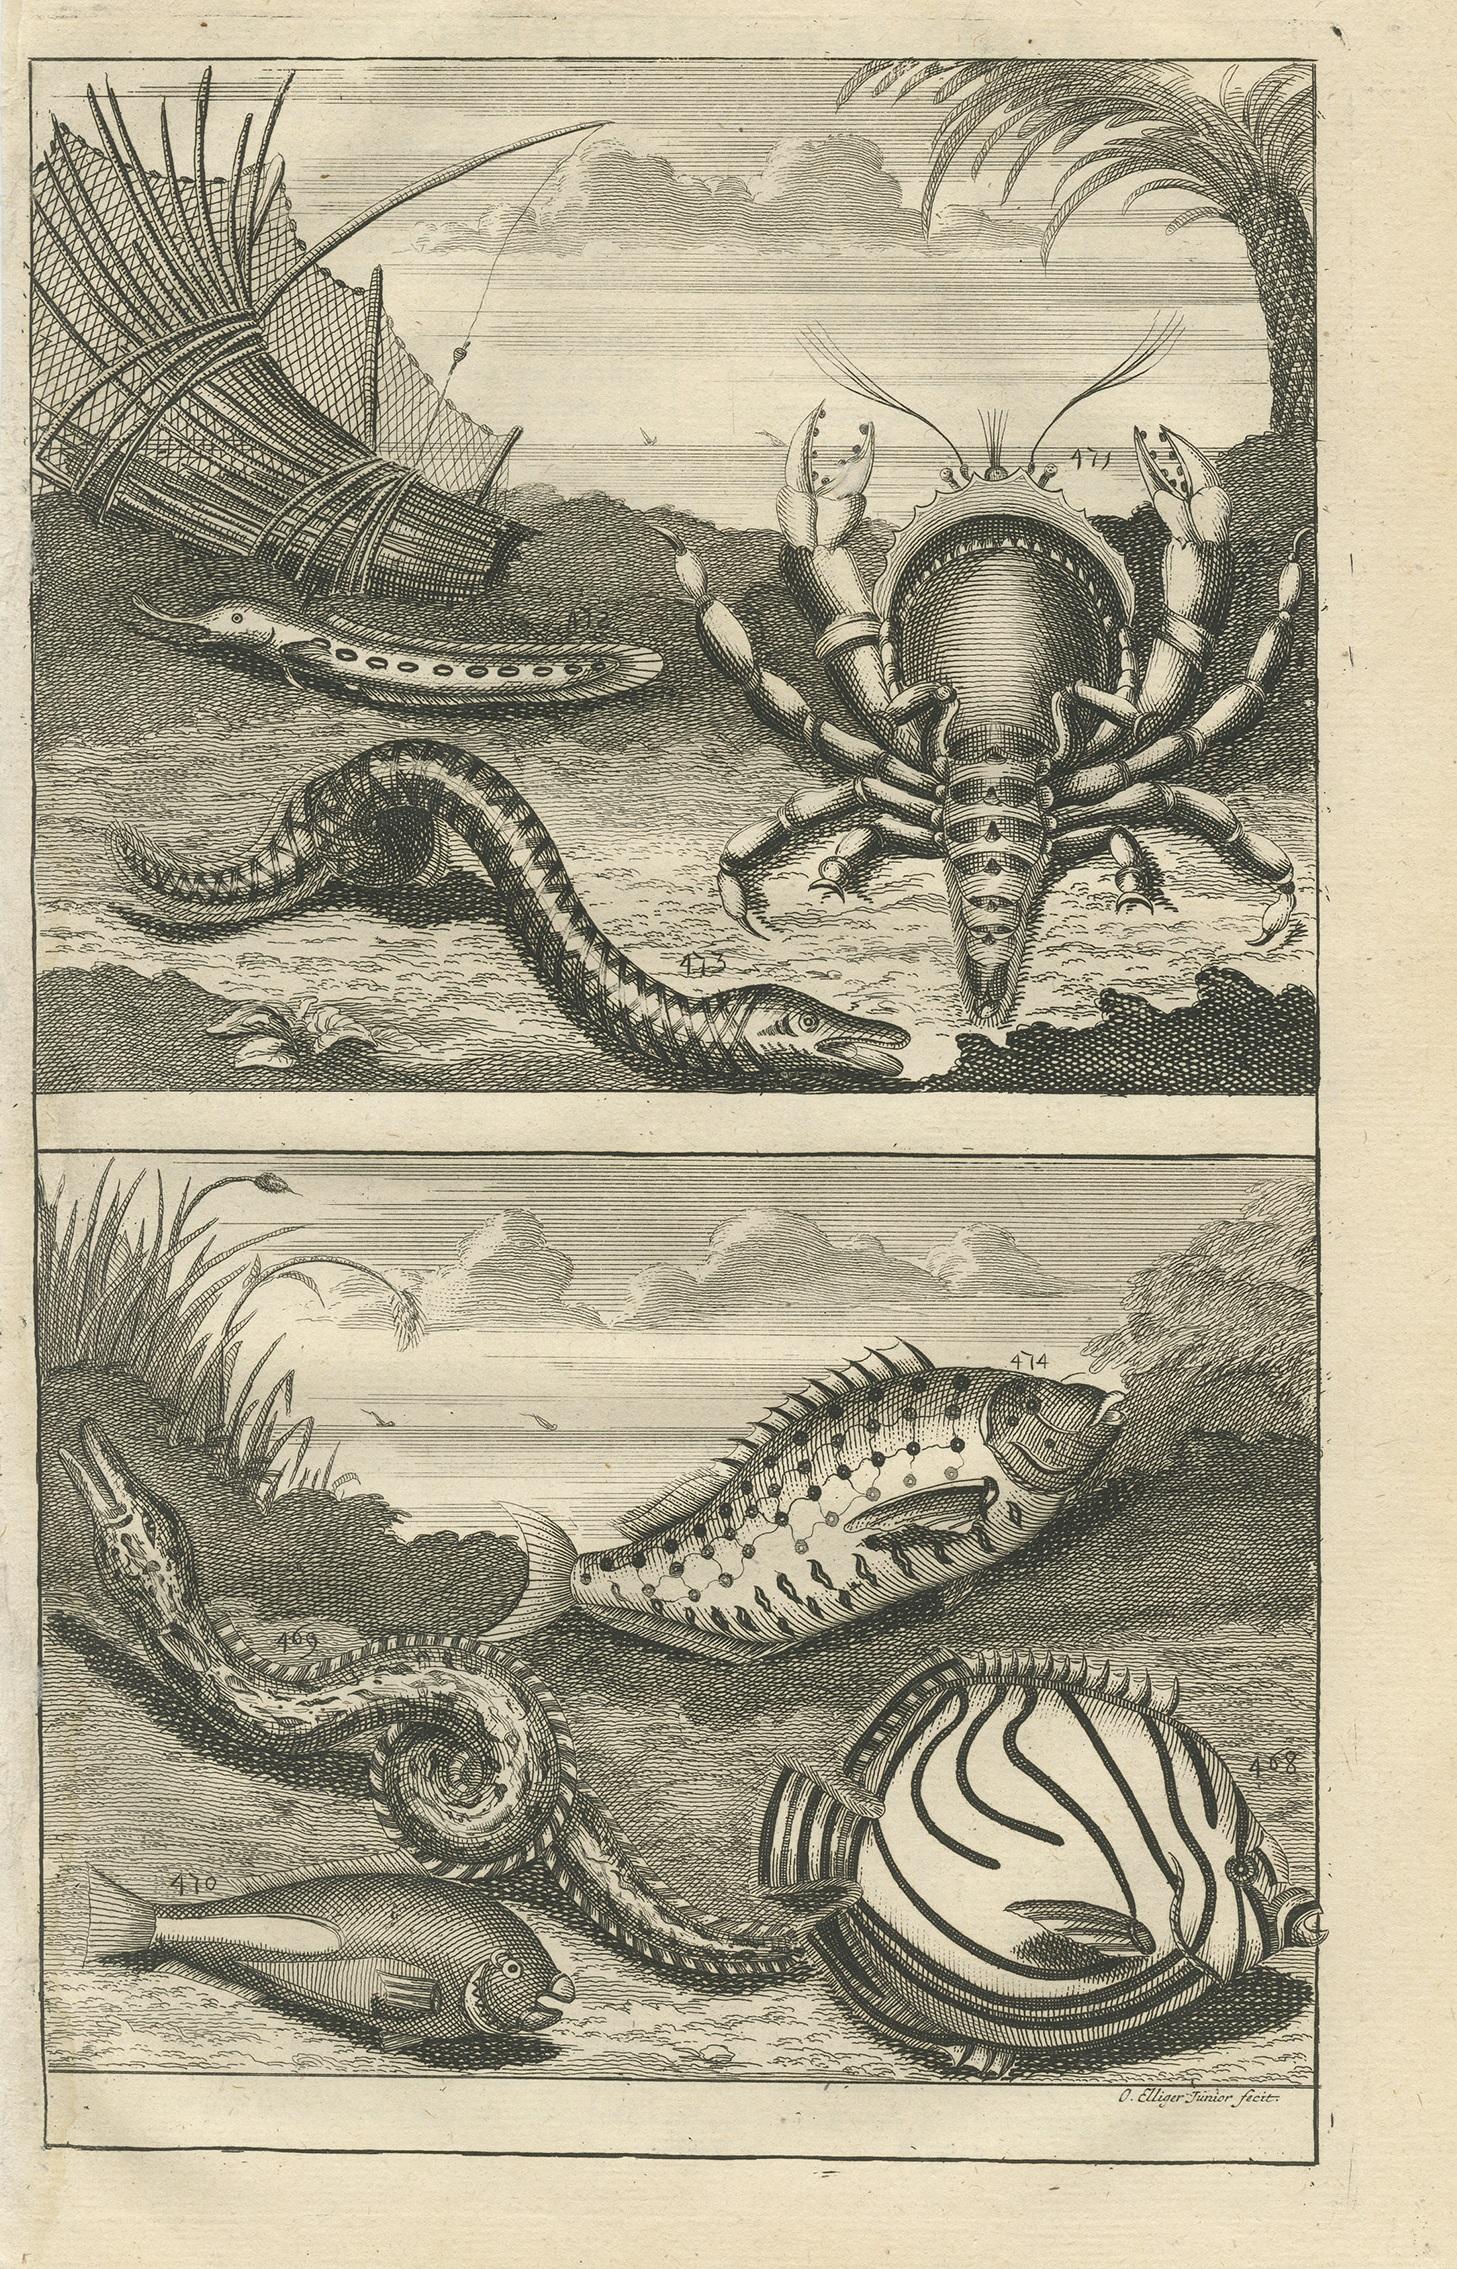 Untitled print of various fish species from Indonesia. This print originates from 'Oud en Nieuw Oost-Indiën' by F. Valentijn.